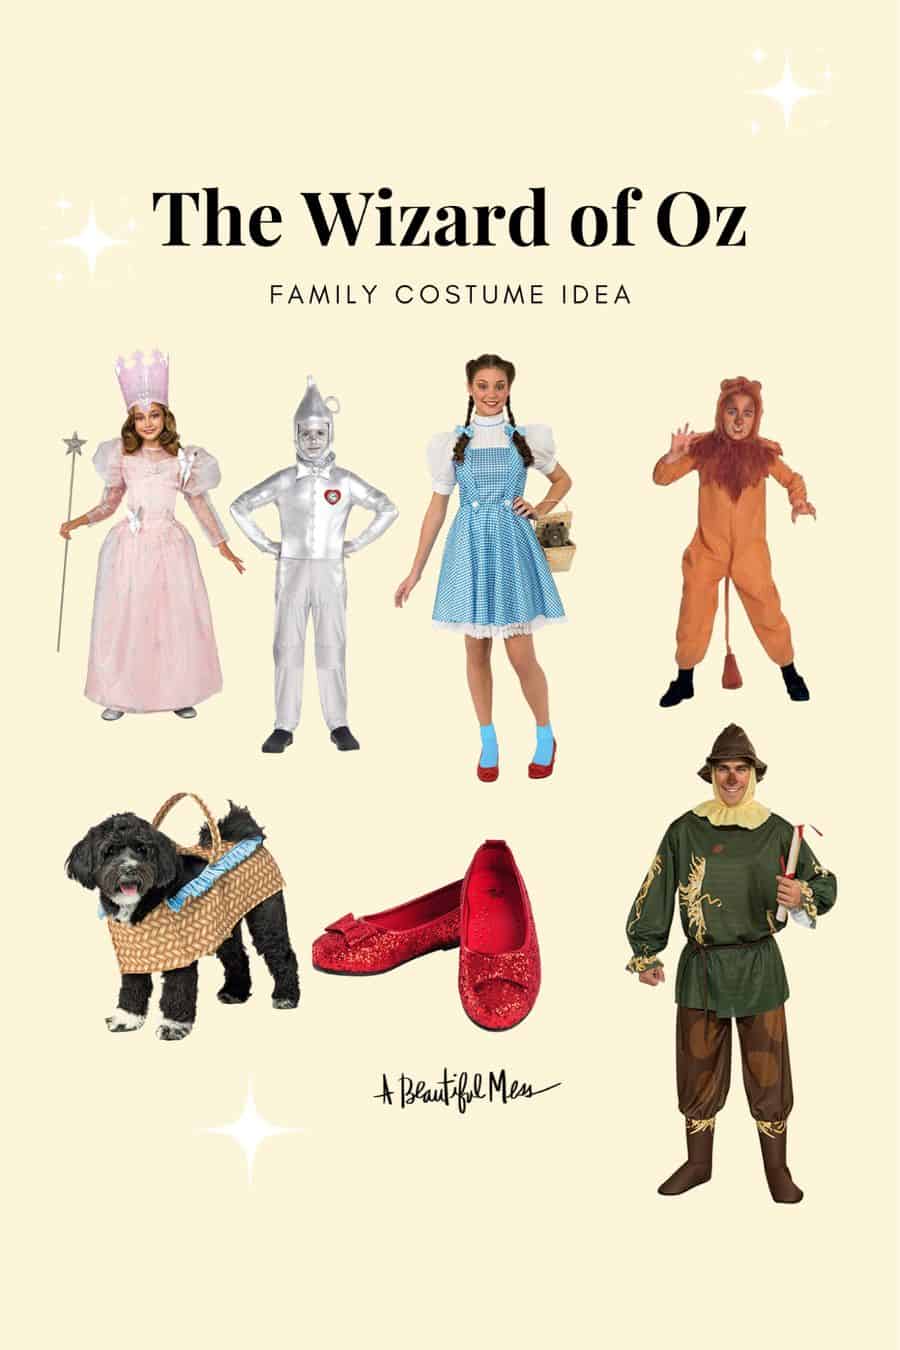 Family halloween costume ideas from The Wizard of Oz